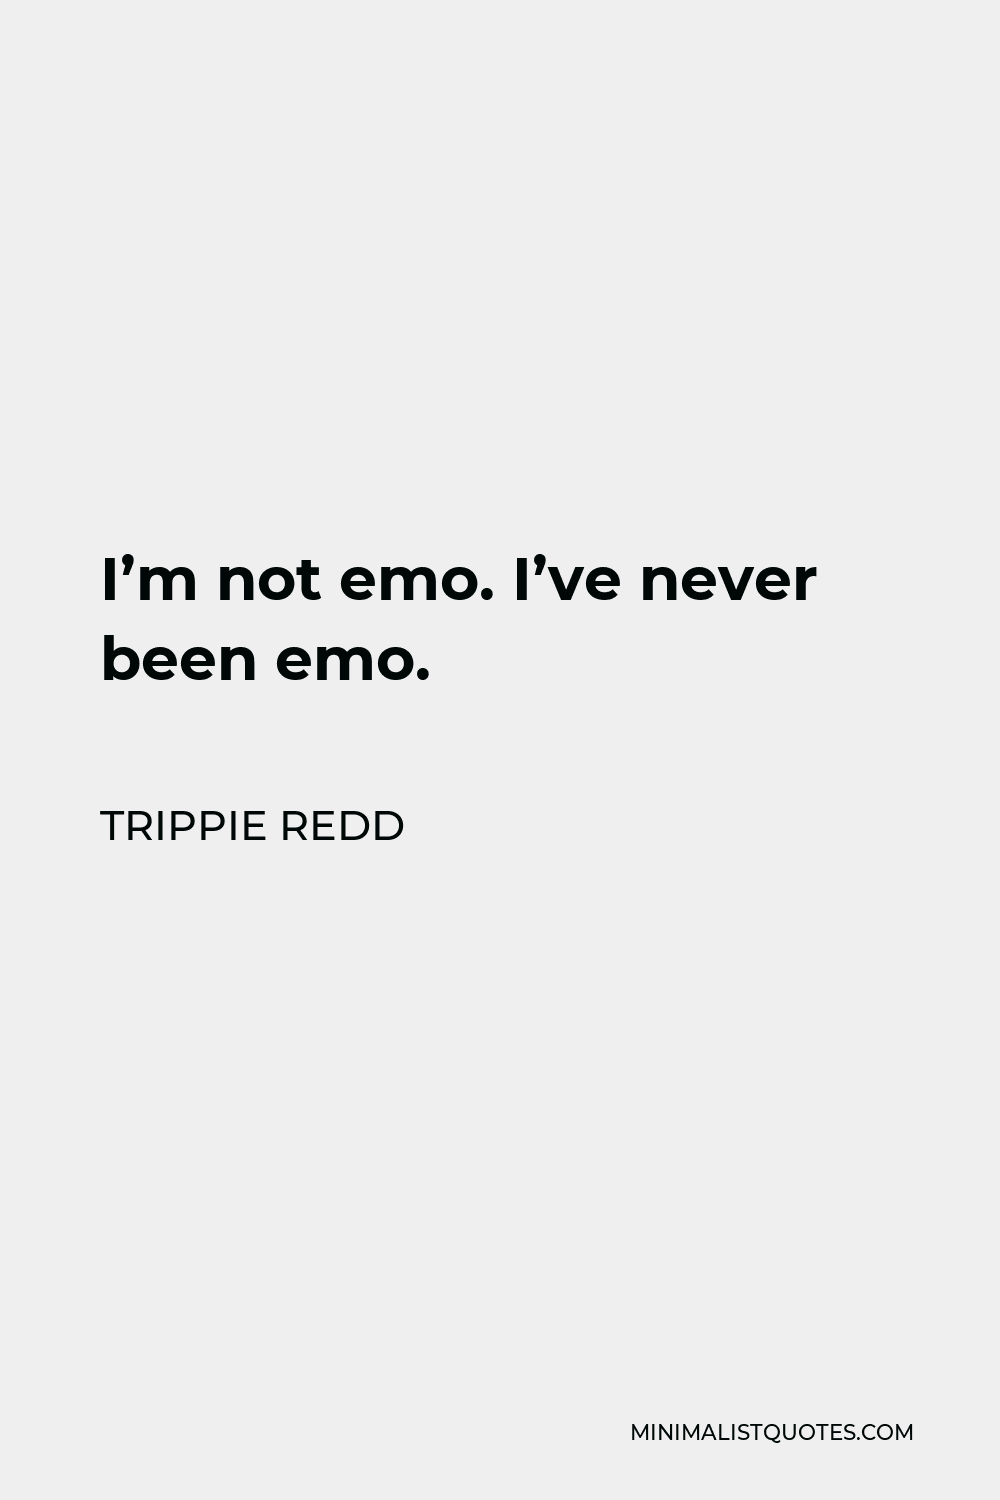 Trippie Redd Quote - I’m not emo. I’ve never been emo.